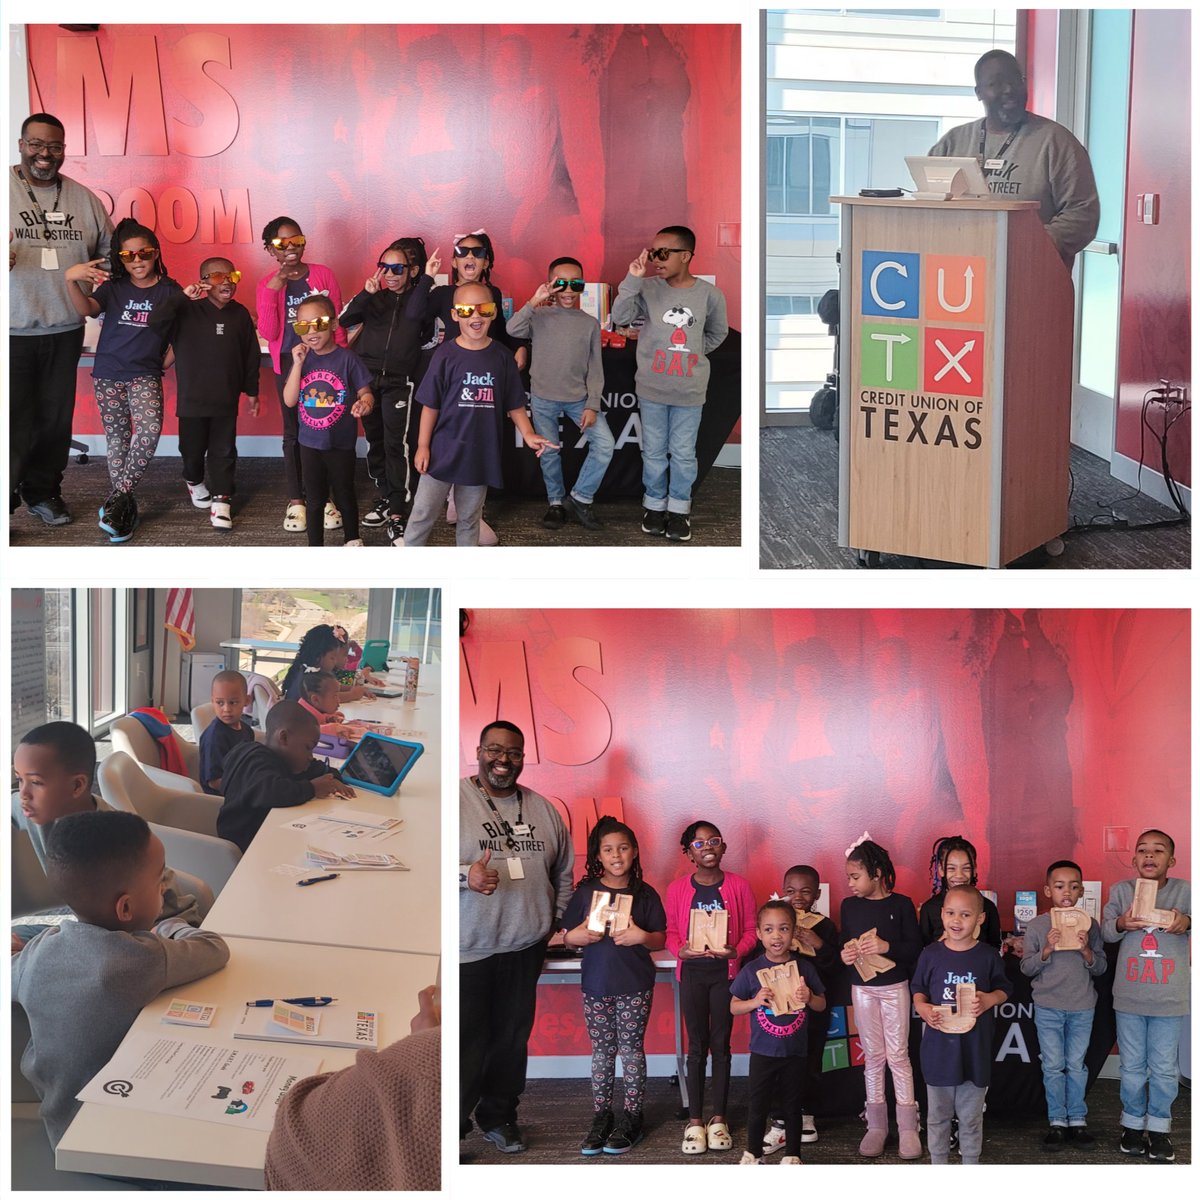 Last month, our littlest Jacks & Jills had fun getting introduced to the basics of saving, spending, & sharing with the Credit Union of Texas. We sparked their curiosity & creativity... hopefully setting them on the path to financial success! Program Thrust:FinancialLiteracy